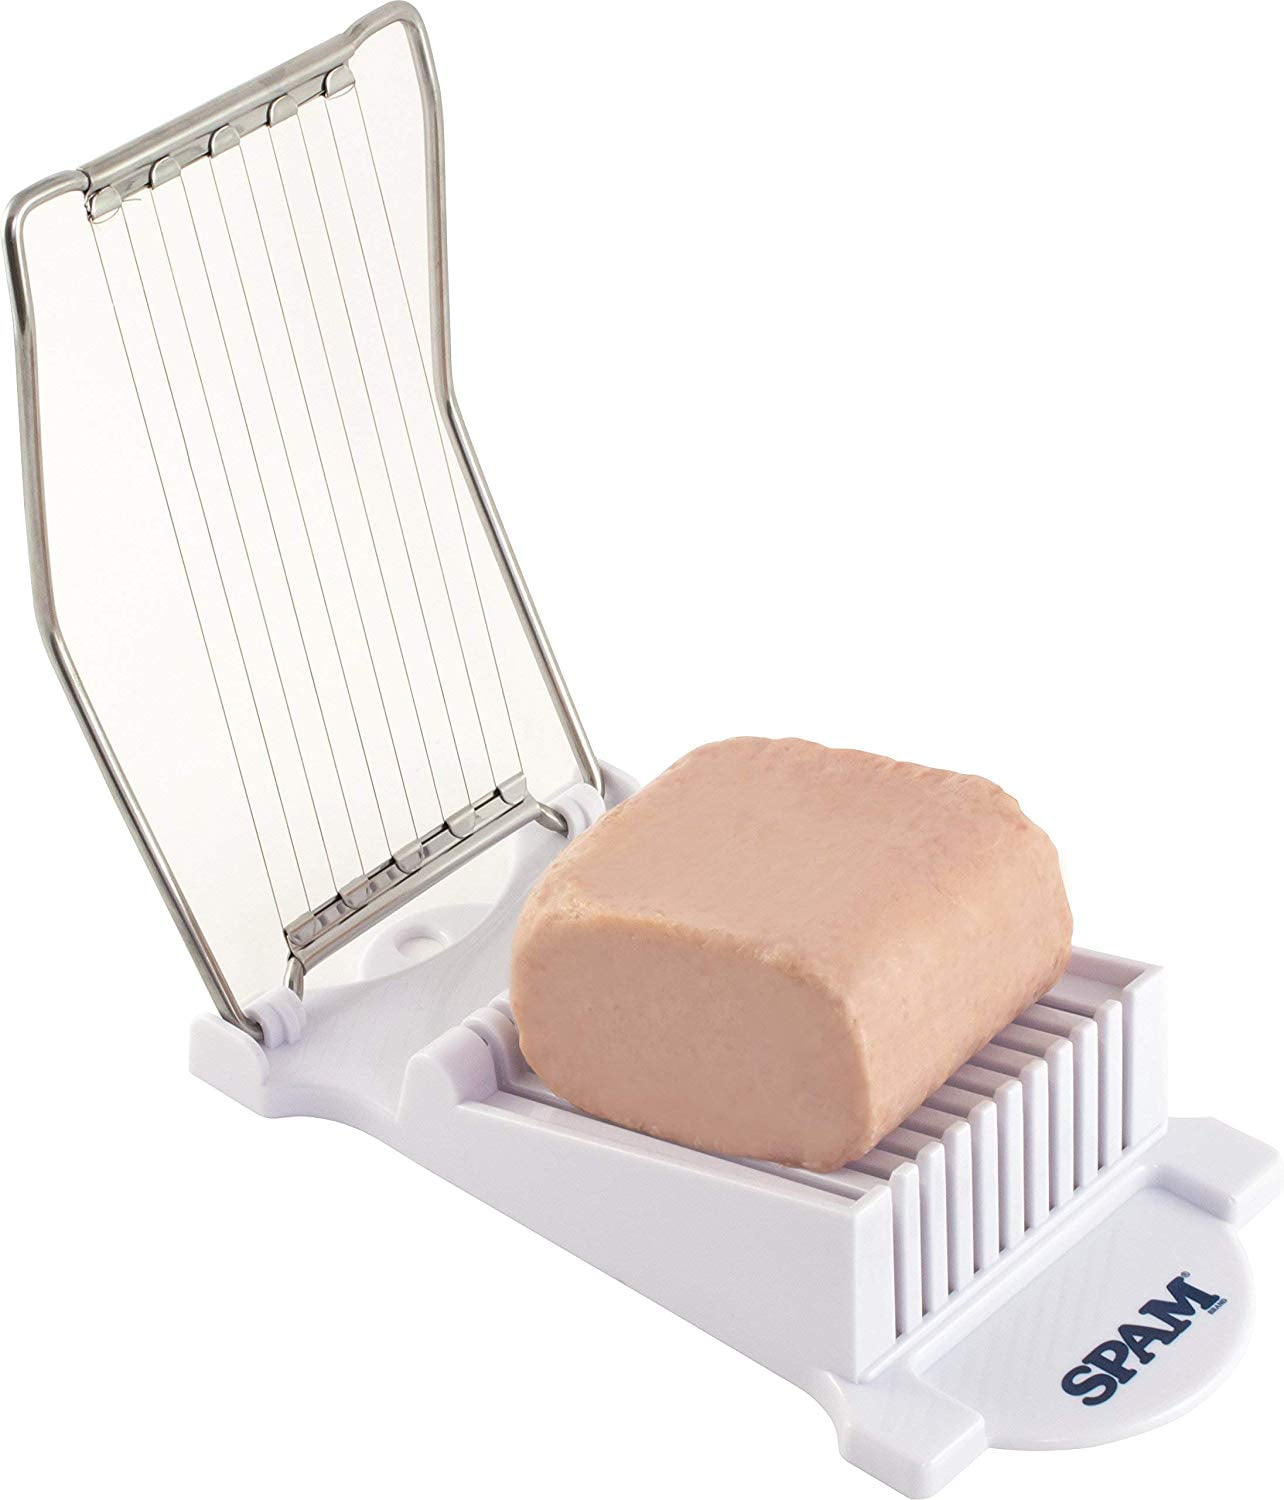 Lunch Meat Slicer for Musubi 10 Wire 